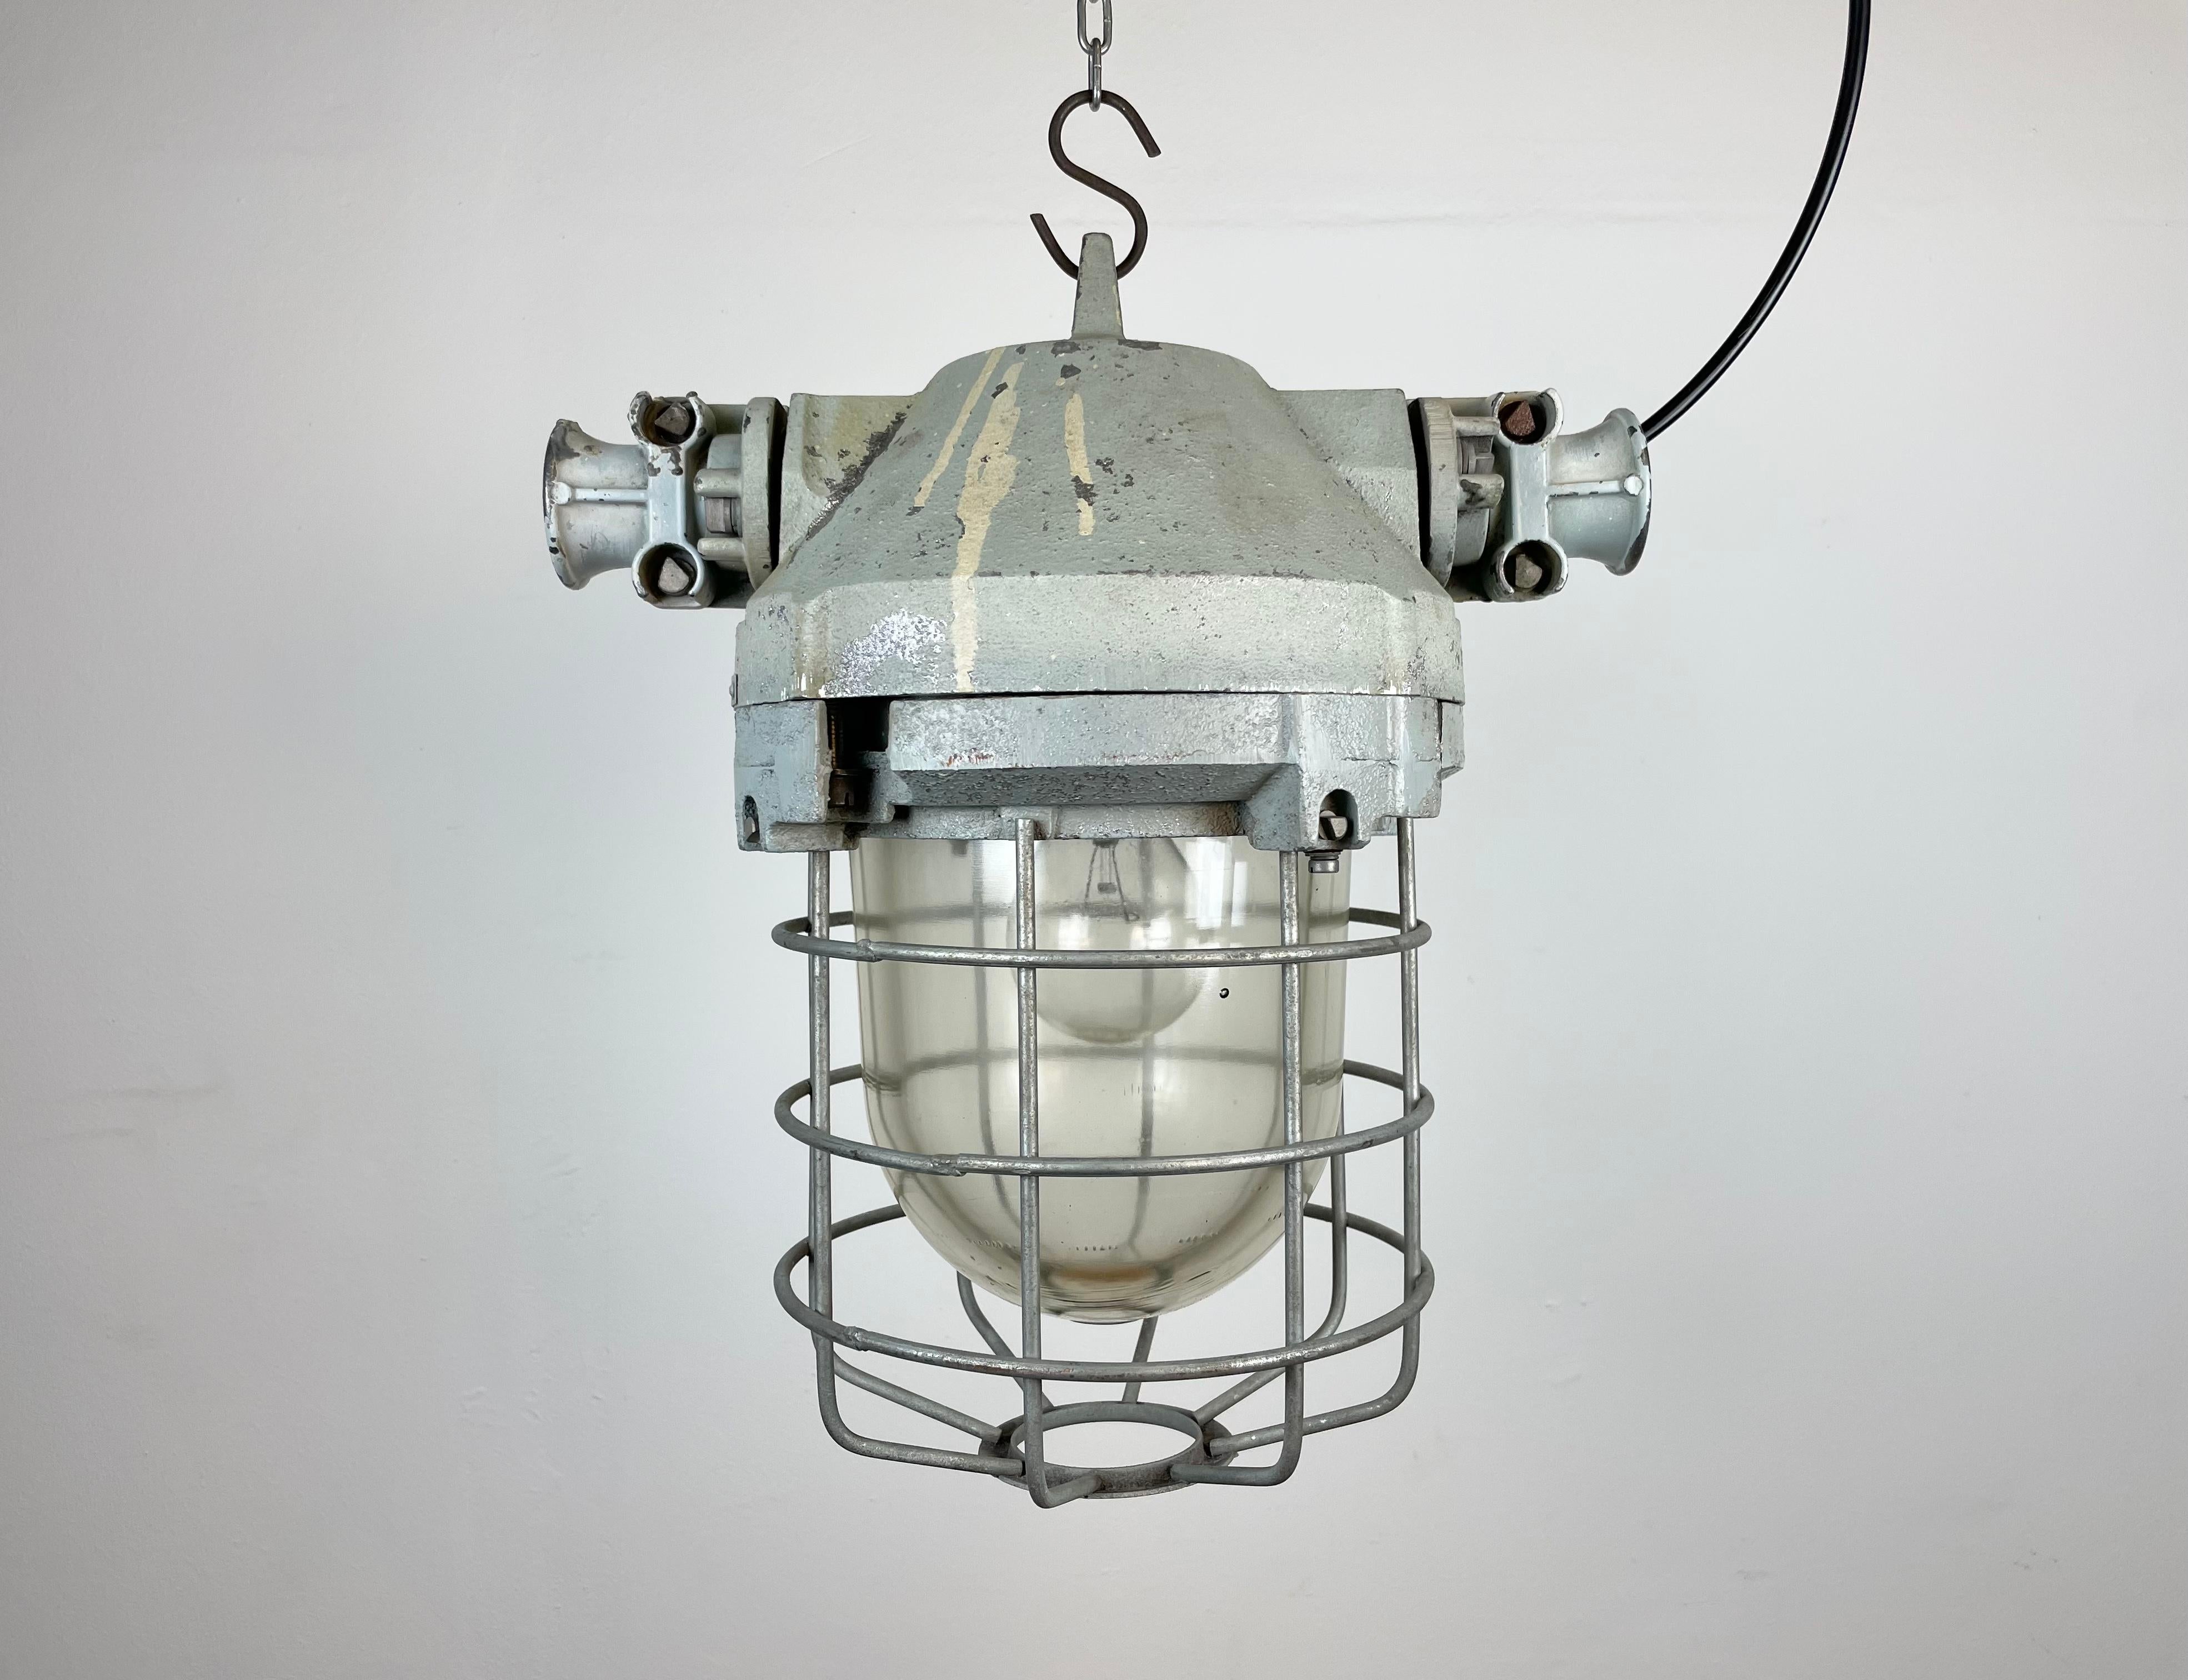 Industrial factory light manufactured by Elektrosvit in former Czechoslovakia during the 1970s. It features a cast aluminium body, an iron cage and explosion-proof glass.
The socket requires E27 lightbulbs. New wire. The weight of the lamp is 9 kg.